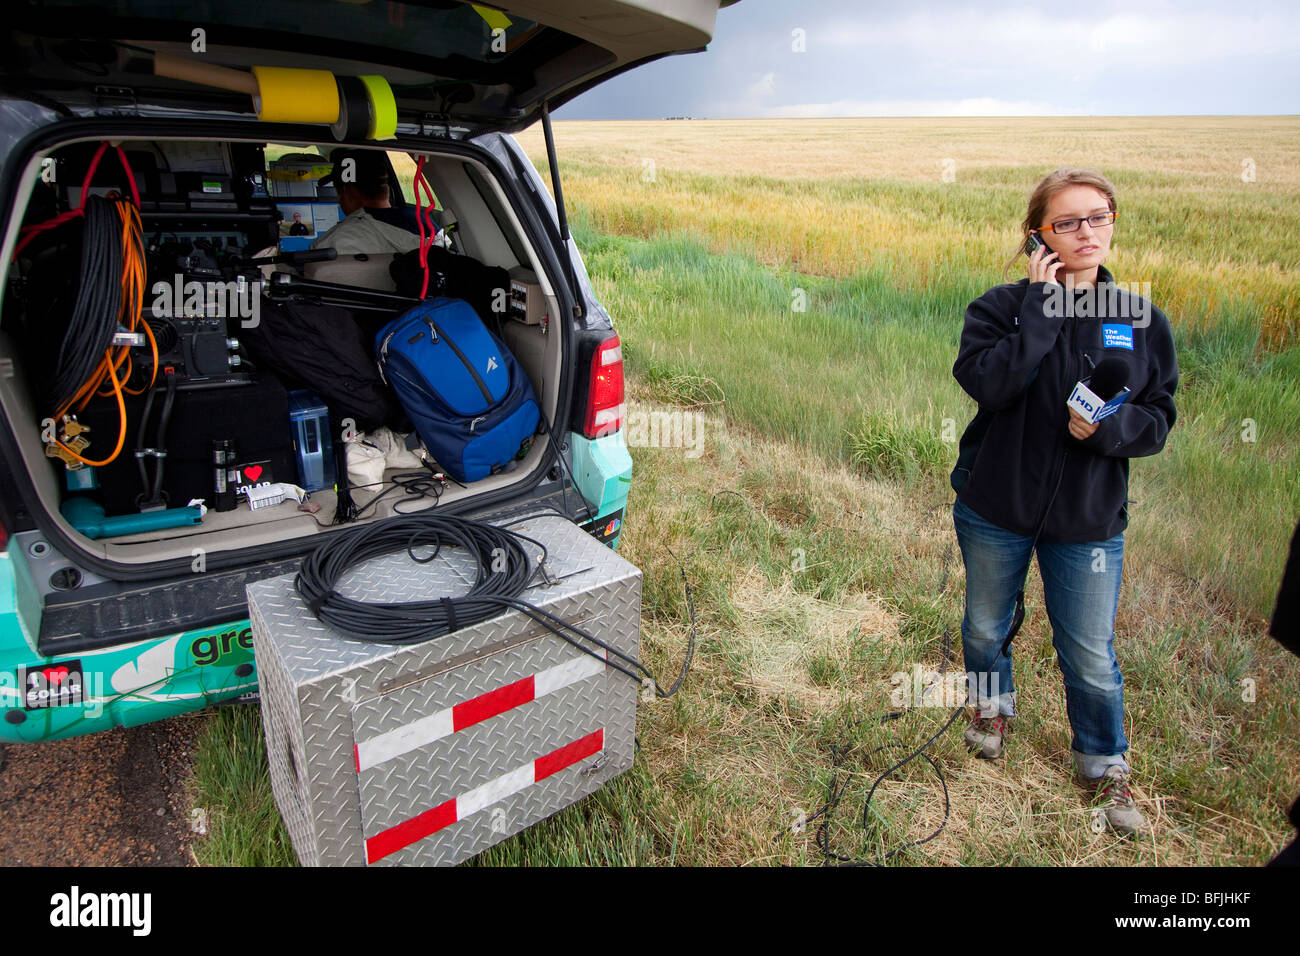 Weather Channel reporter Katy Tur in western Kansas, USA, June 10, 2009. Stock Photo